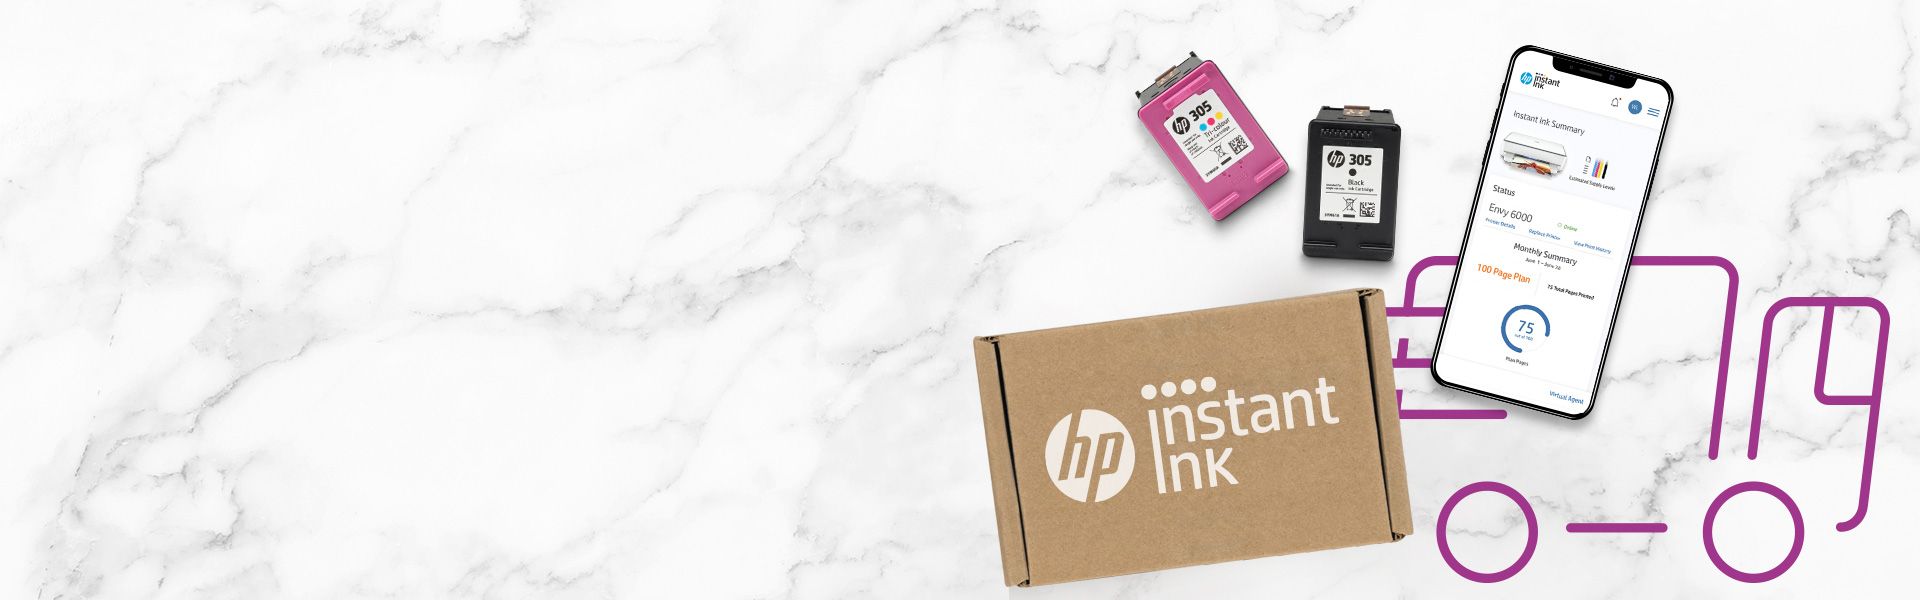 Never run out and save 70% with HP Instant Ink